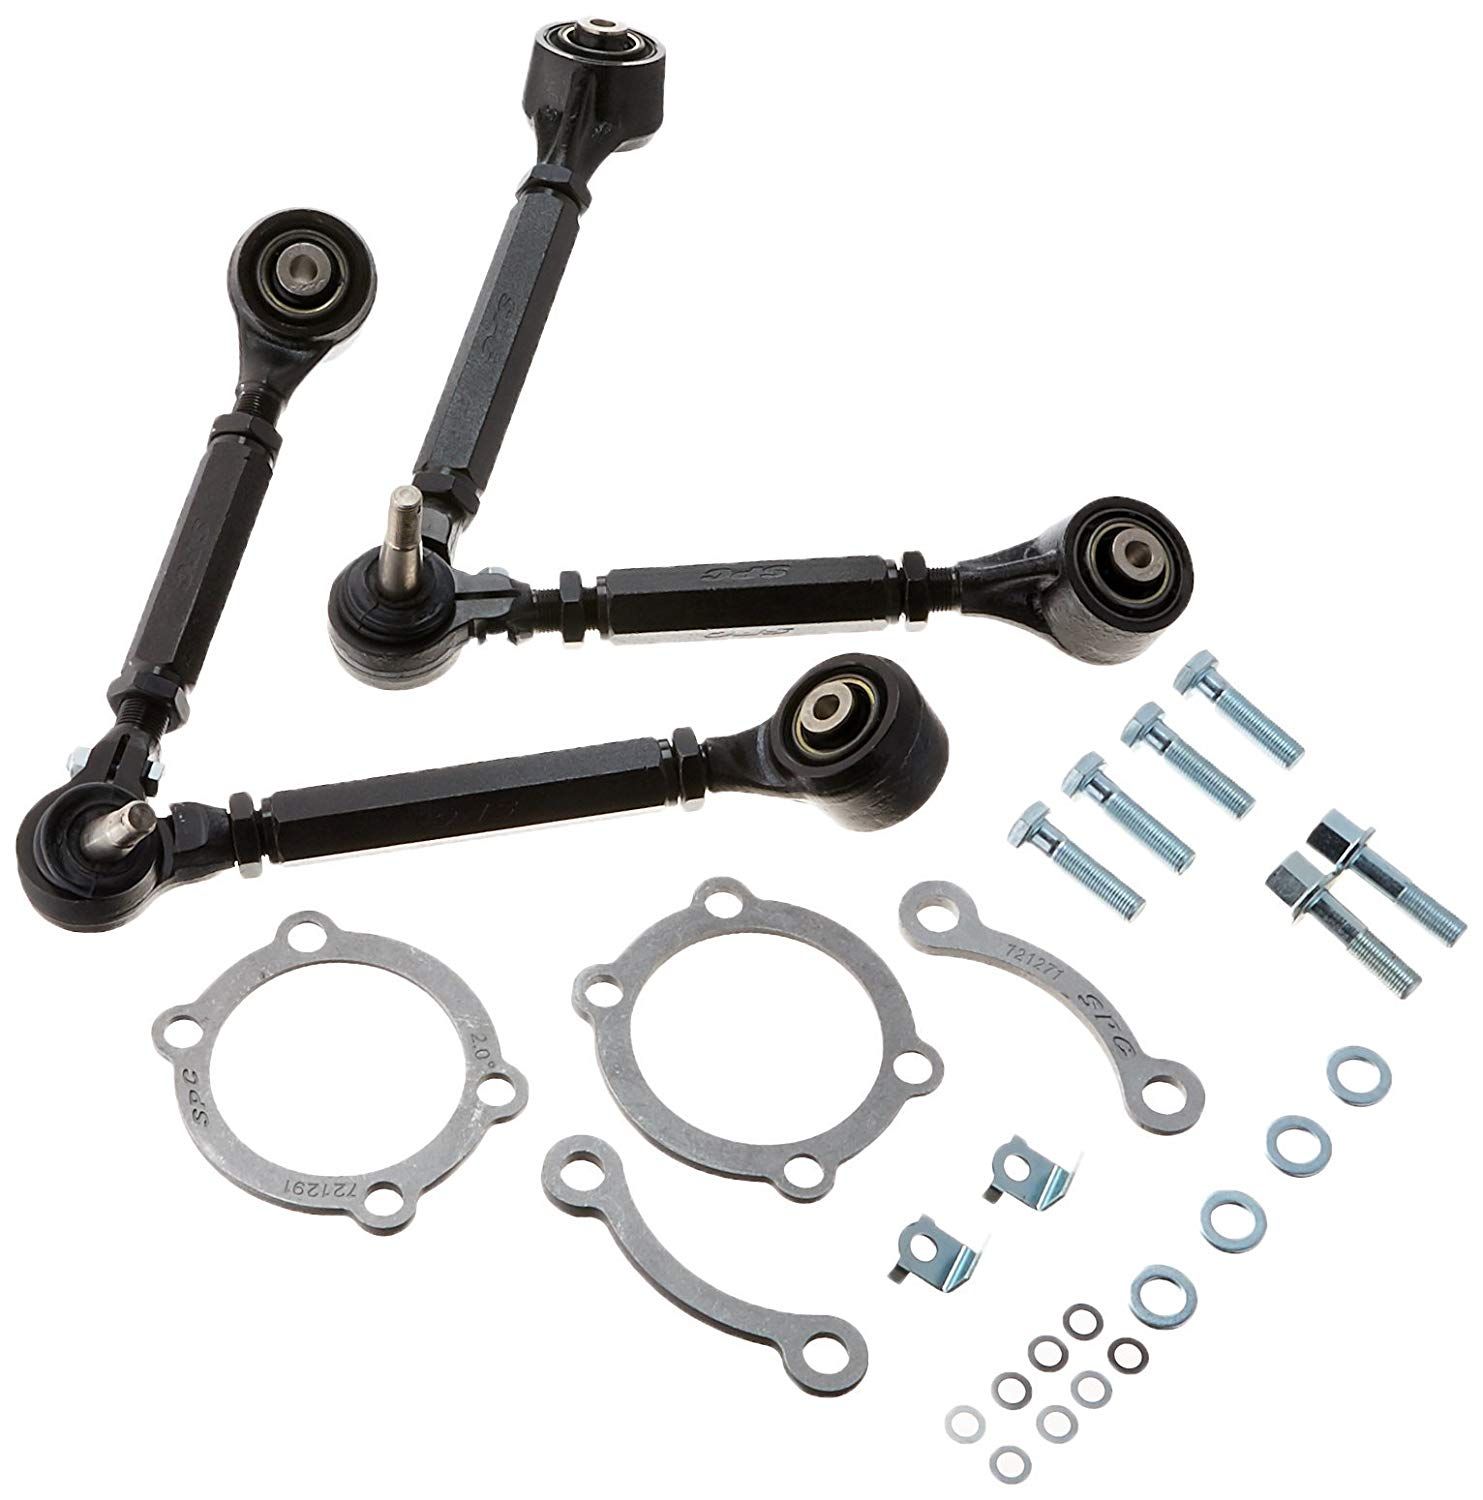 SPC Performance Front Adjustable Camber Upper Control Arms - Nissan 350Z / Infiniti G35